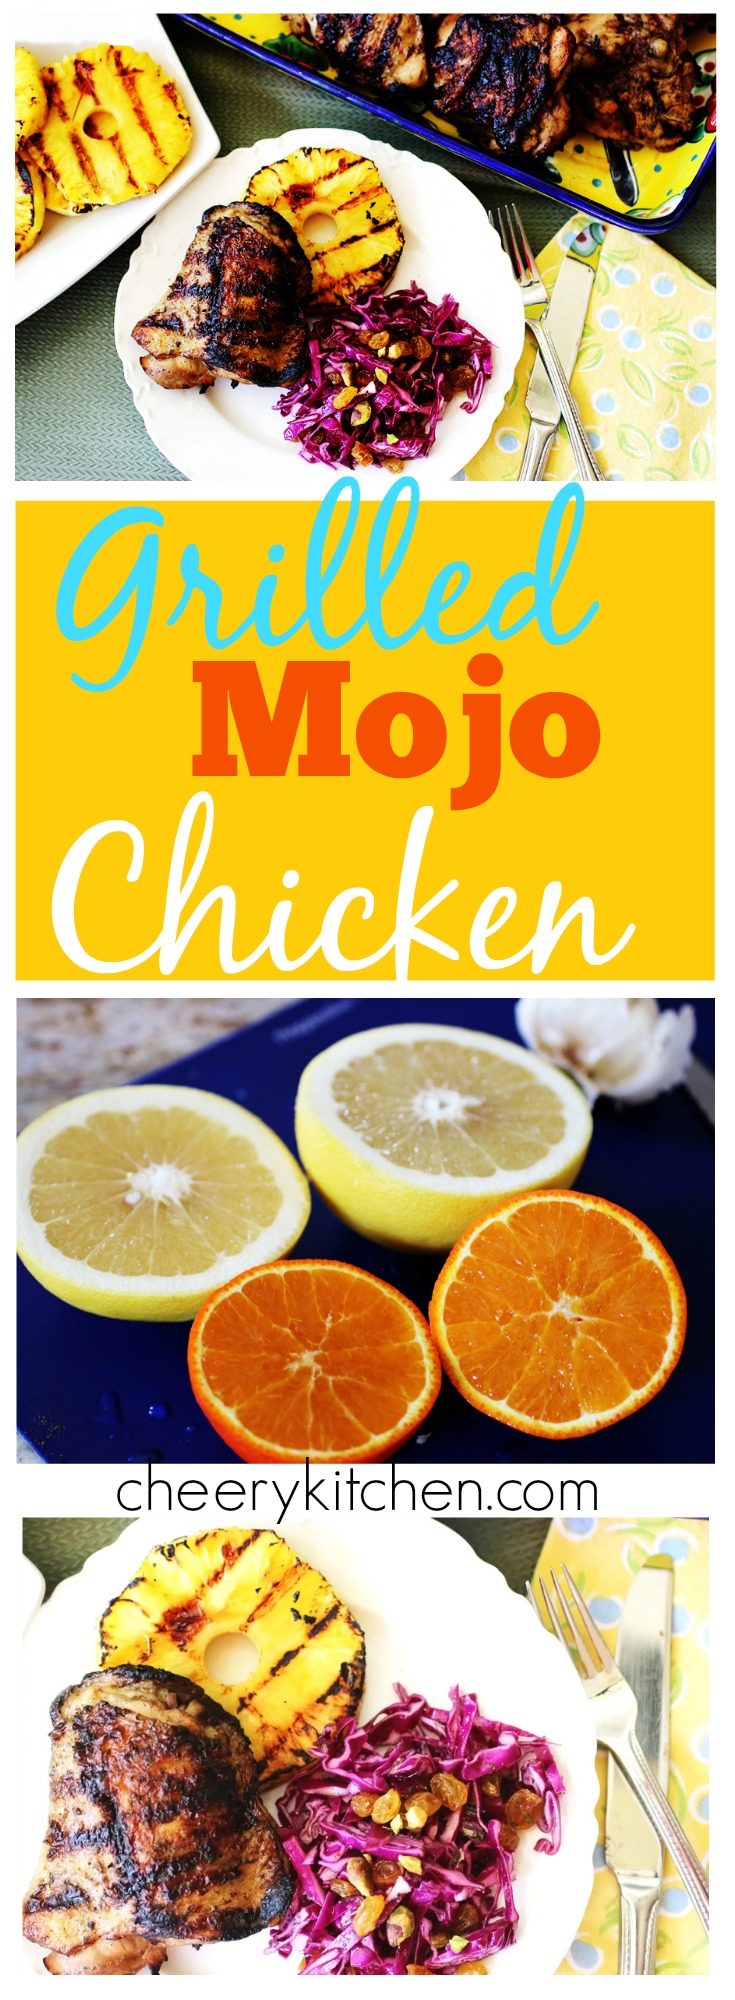 Grilled Mojo Chicken is easy and beyond delicious. Whirl the citrus marinade in your blender and pour over chicken. The next day grill and enjoy the tastiest chicken ever!